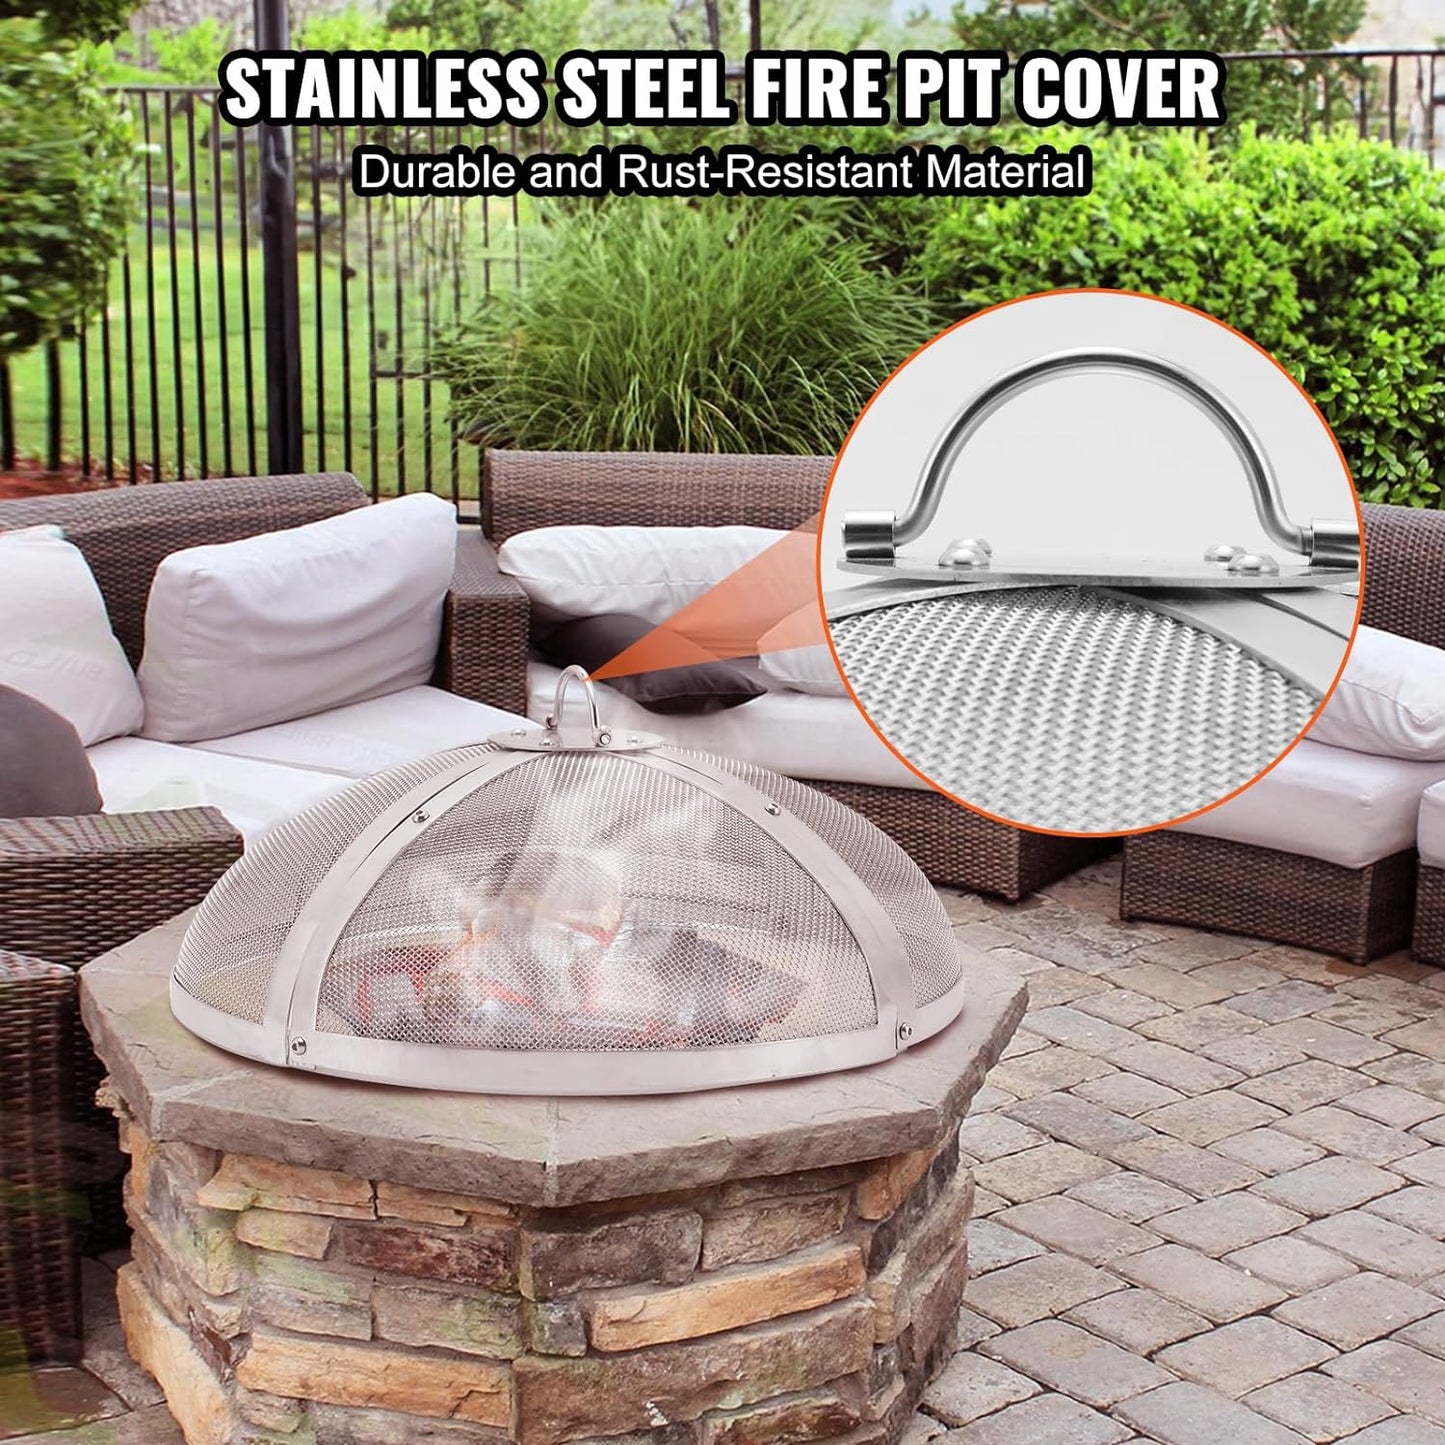 Fire Pit Spark Screen Round 36", Reinforced Heavy Duty Steel Metal Cover, Outdoor Firepit Lid, Easy-Opening Top Screen Covers Round with Ring Handle for Outdoor Patio Fire Pits Backyard